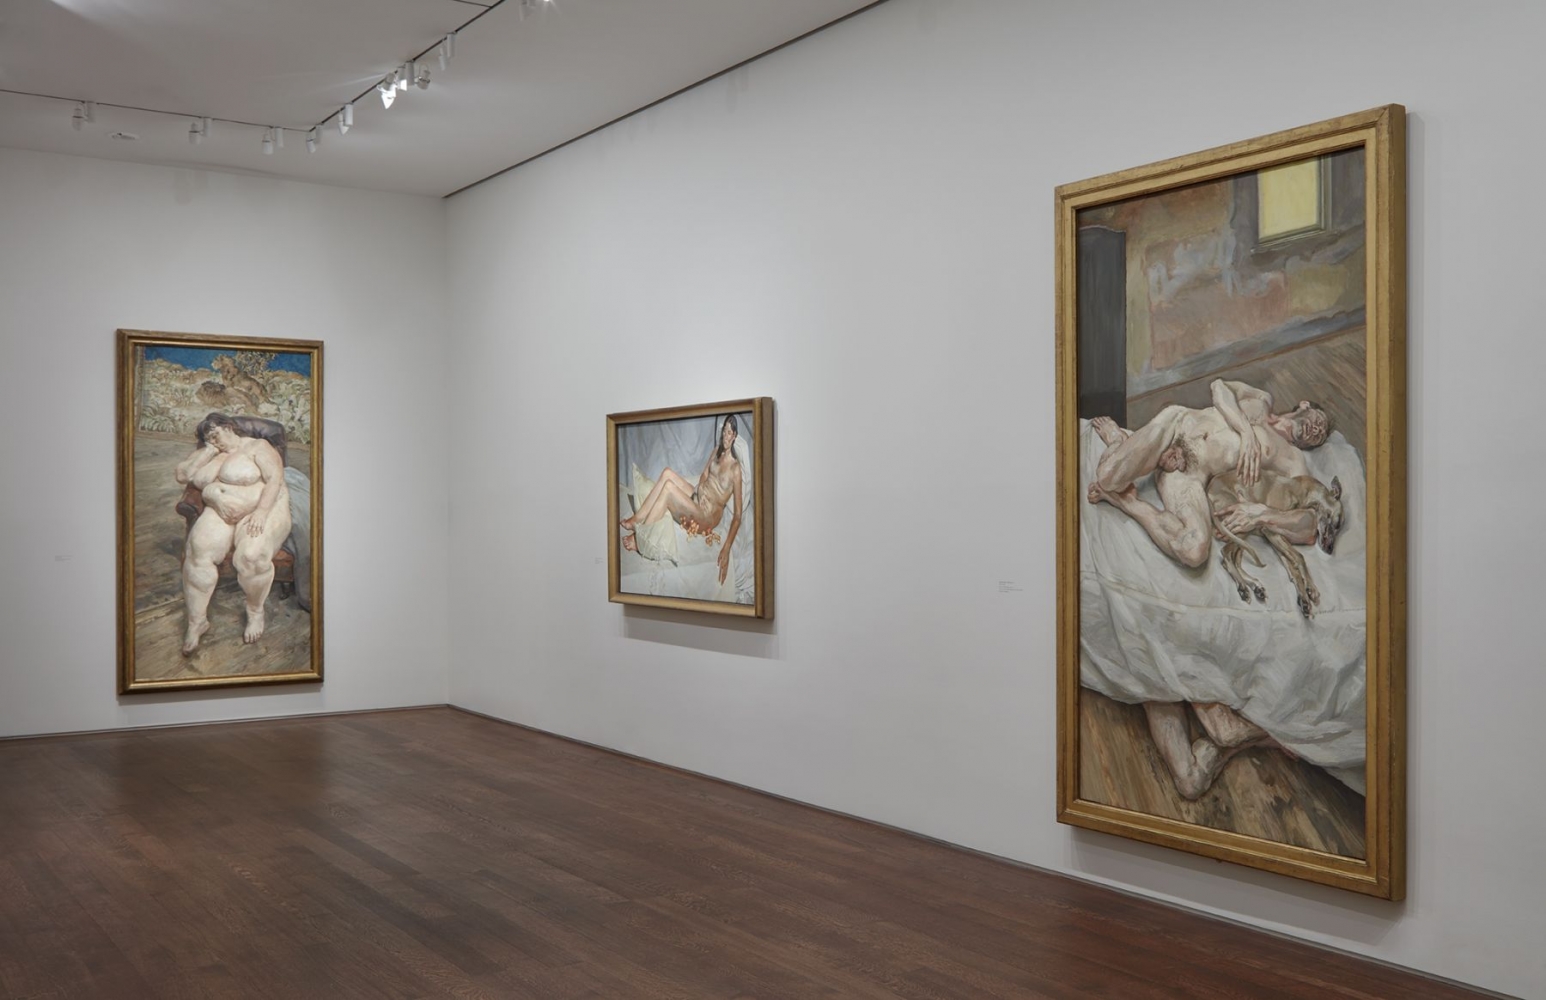 Installation view of&nbsp;Lucian Freud: Monumental&nbsp;at Acquavella Galleries from April 5&ndash;May 24, 2019.&nbsp;Left to right:&nbsp;Sleeping by the Lion Carpet,&nbsp;1995-96, Lent by&nbsp;The Lewis Collection;&nbsp;Irish Woman on a Bed, 2003-04, Lent by&nbsp;Private Collection;&nbsp;Sunny Morning&mdash;Eight Legs,&nbsp;1997, Lent by&nbsp;The Art Institute of Chicago; Joseph Winterbotham Collection (1997.561)., Photo by Kent Pell. Art&nbsp;&copy; The Lucian Freud Archive / Bridgeman Images.